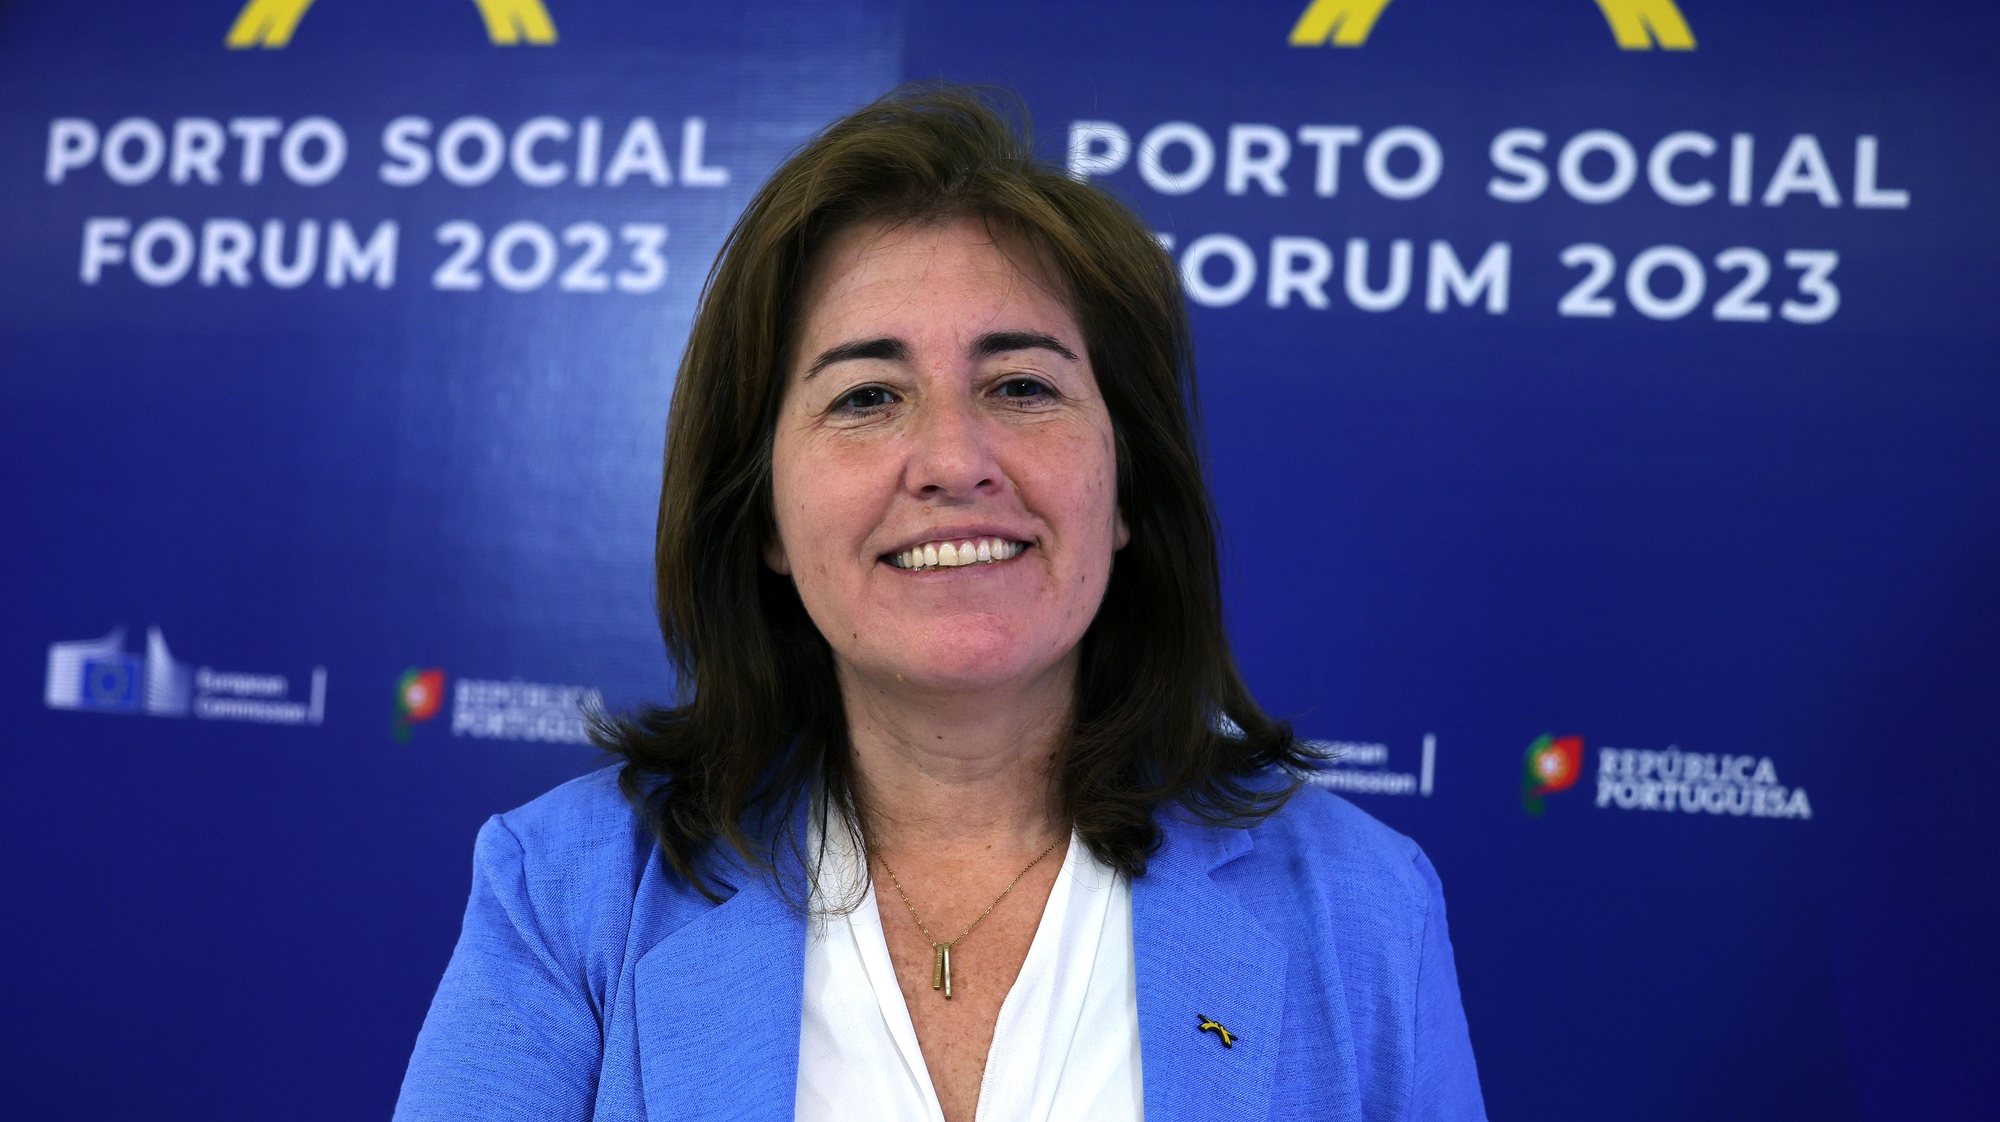 Ana Mendes Godinho Portuguese Minister of Labour, Solidarity and Social Security attends the Porto Social Forum at the Pavilhão Rosa Mota, in Porto, Portugal, 26 May 2023. Porto Social Forum aims to reaffirm the role of Social Europe and continue the commitments made at the Porto Social Summit in 2021, involving the Presidency of the Council of the EU, the European Commission, the European Parliament, social partners, and civil society. ESTELA SILVA/LUSA